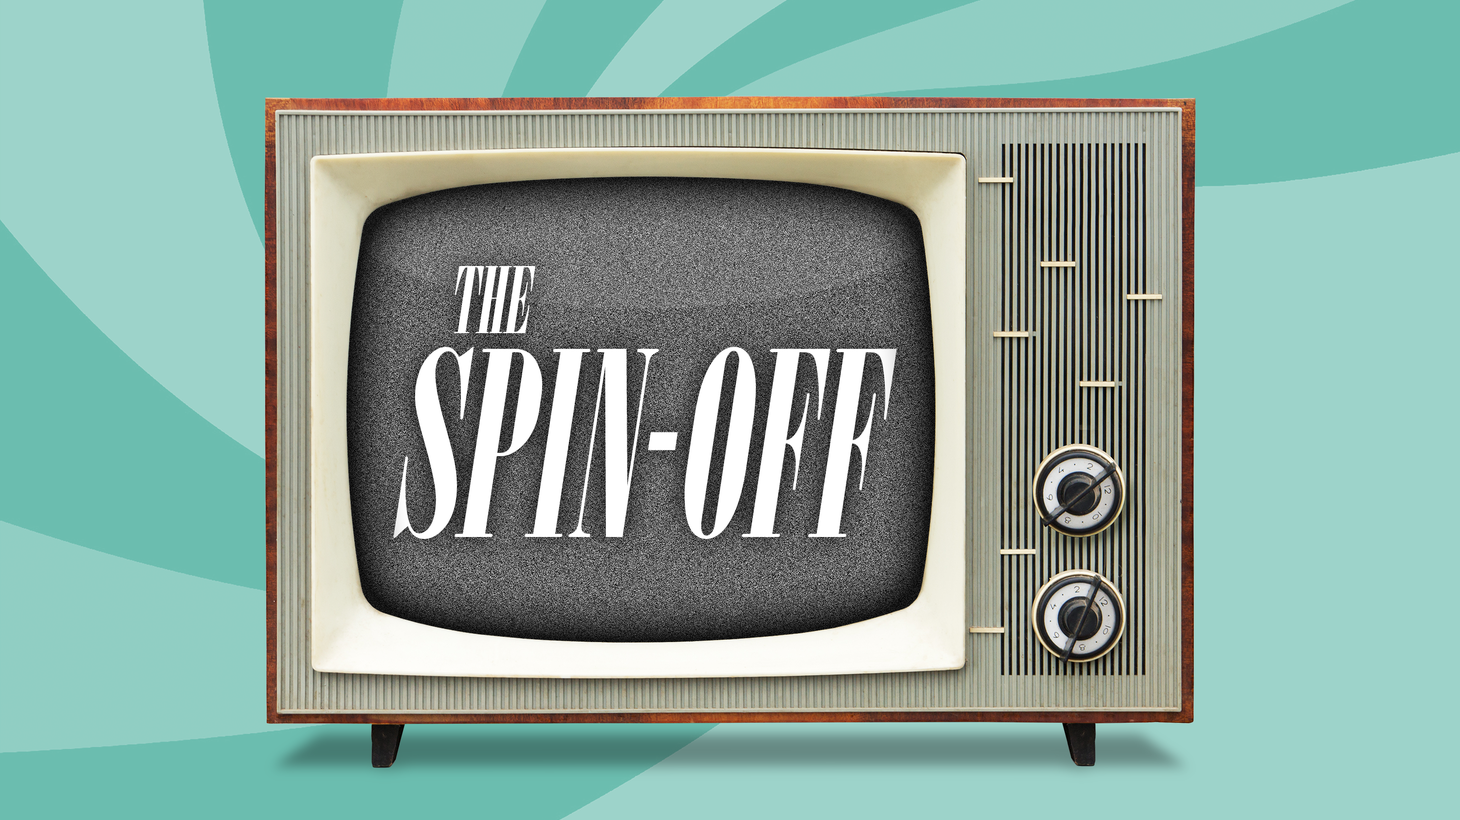 The Spin-off crew sums up the summer. They talk about Olympics ratings, discuss why two hot cable shows are struggling in their second seasons and contemplate whether the myriad niche streaming services can ever offer them the TV line-up of their dreams.